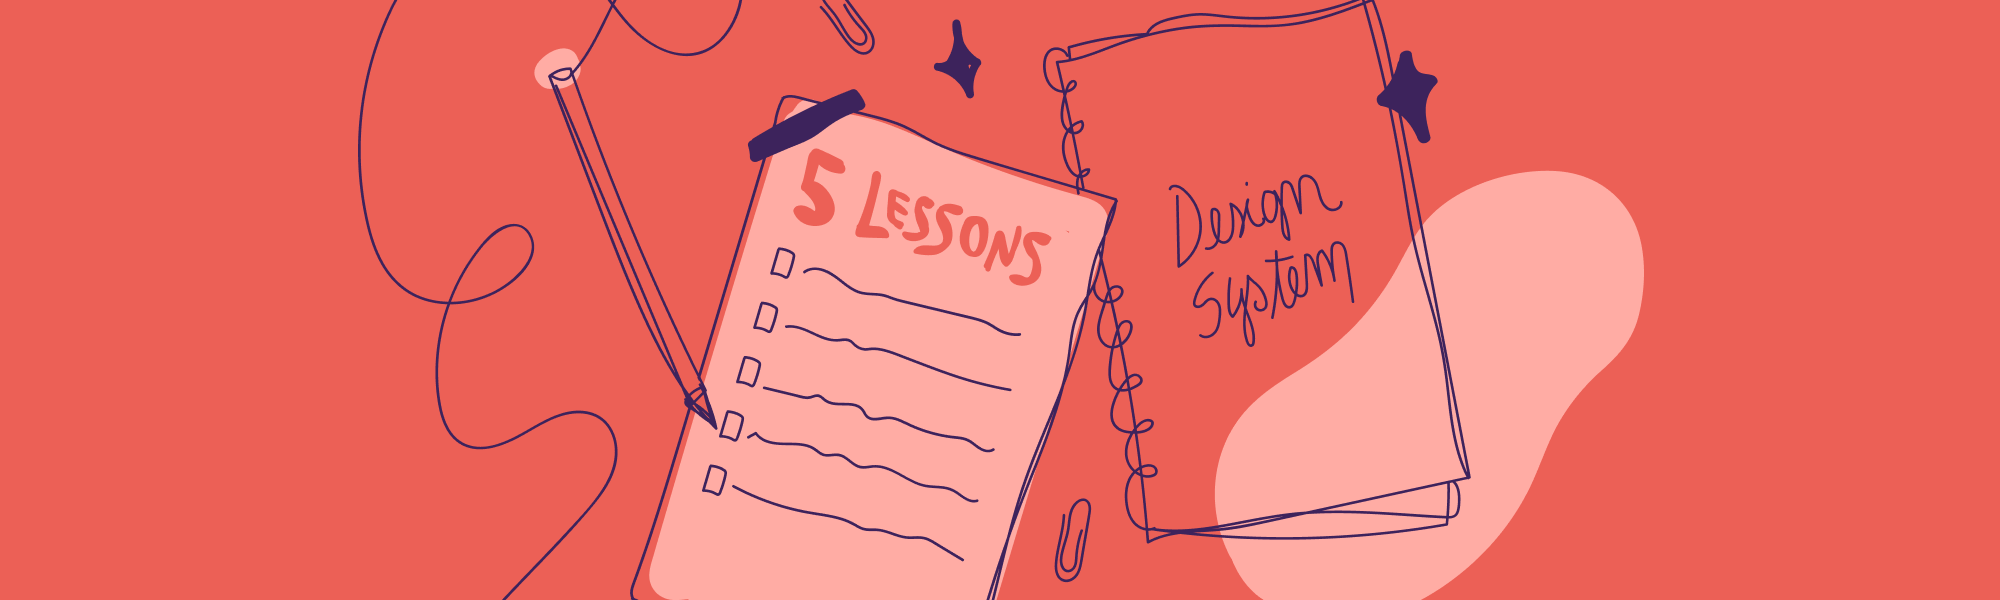 lessons-dsys-cover.png